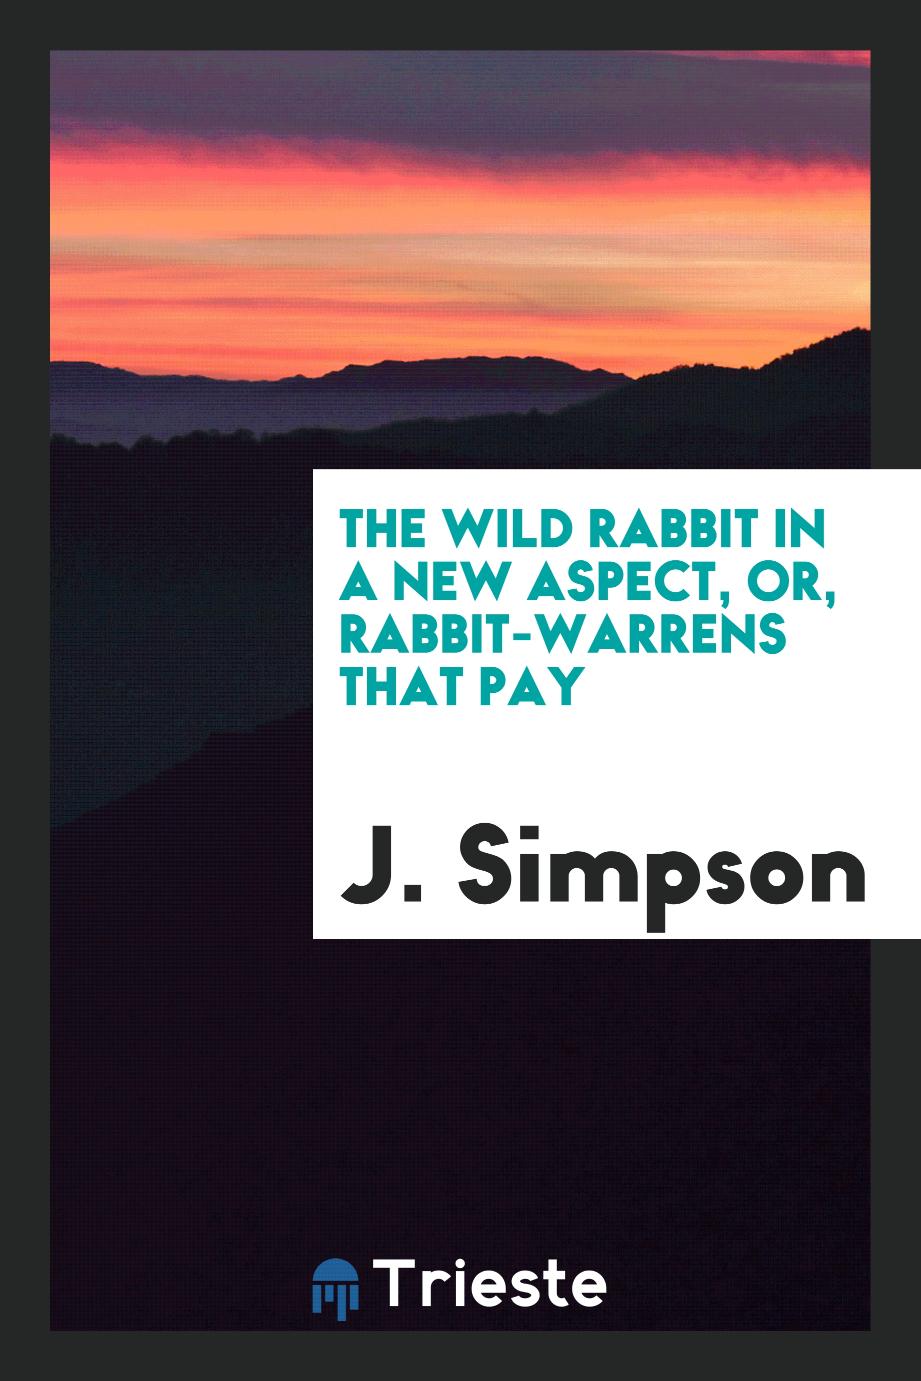 The Wild Rabbit in a New Aspect, or, Rabbit-Warrens That Pay